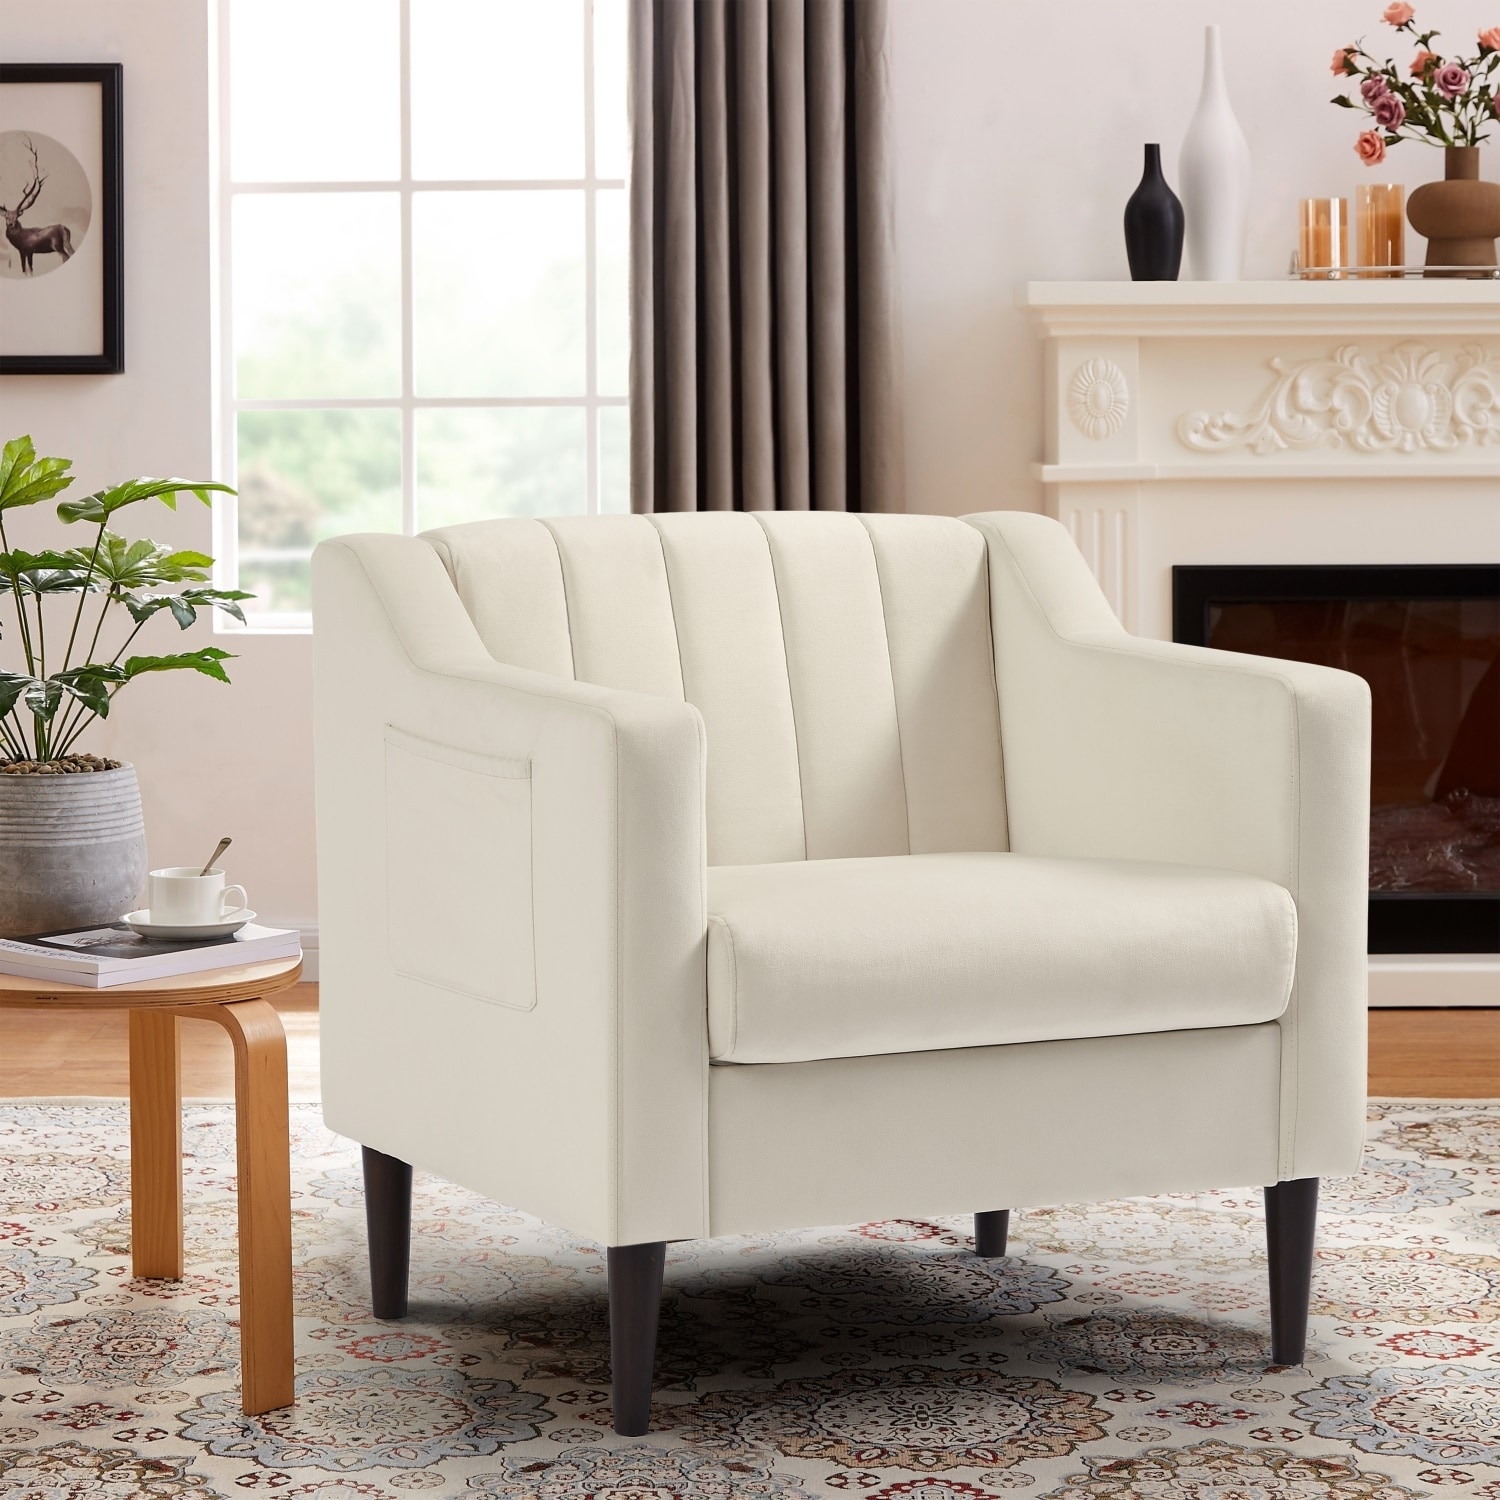 Boston Convertible Chair: Modern Sleeper Chair for Small Spaces